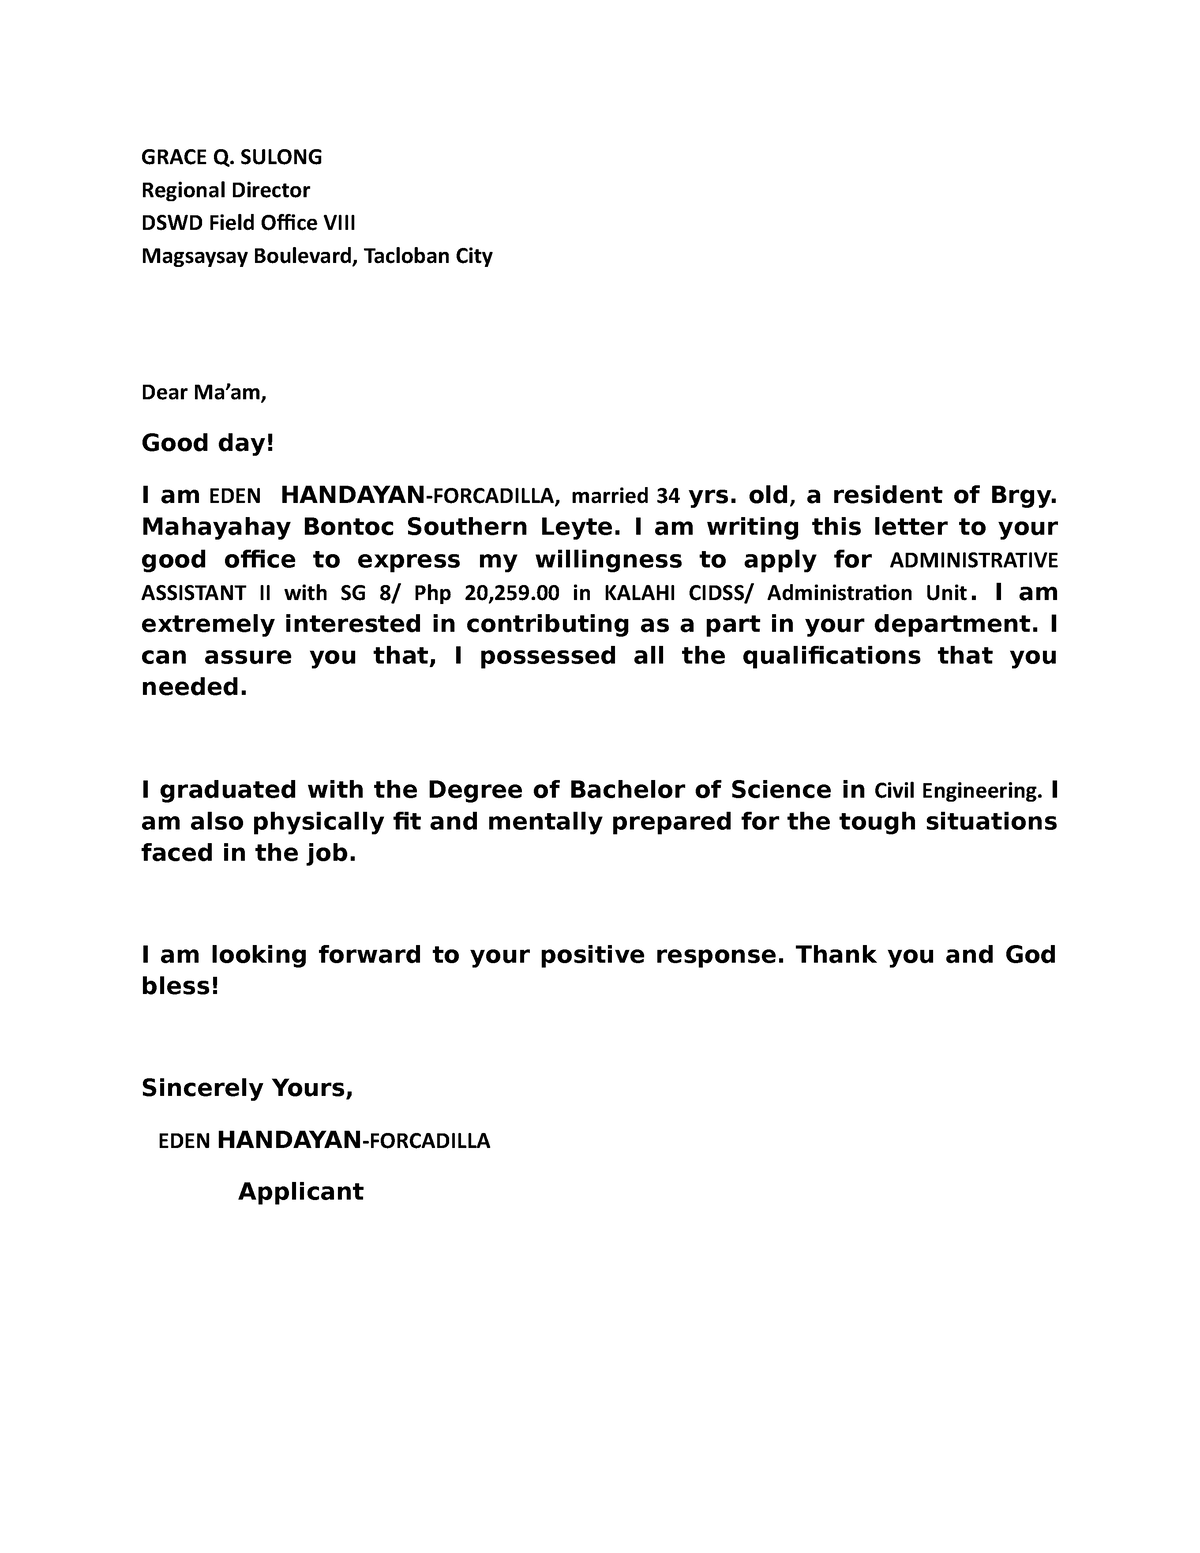 application letter in dswd